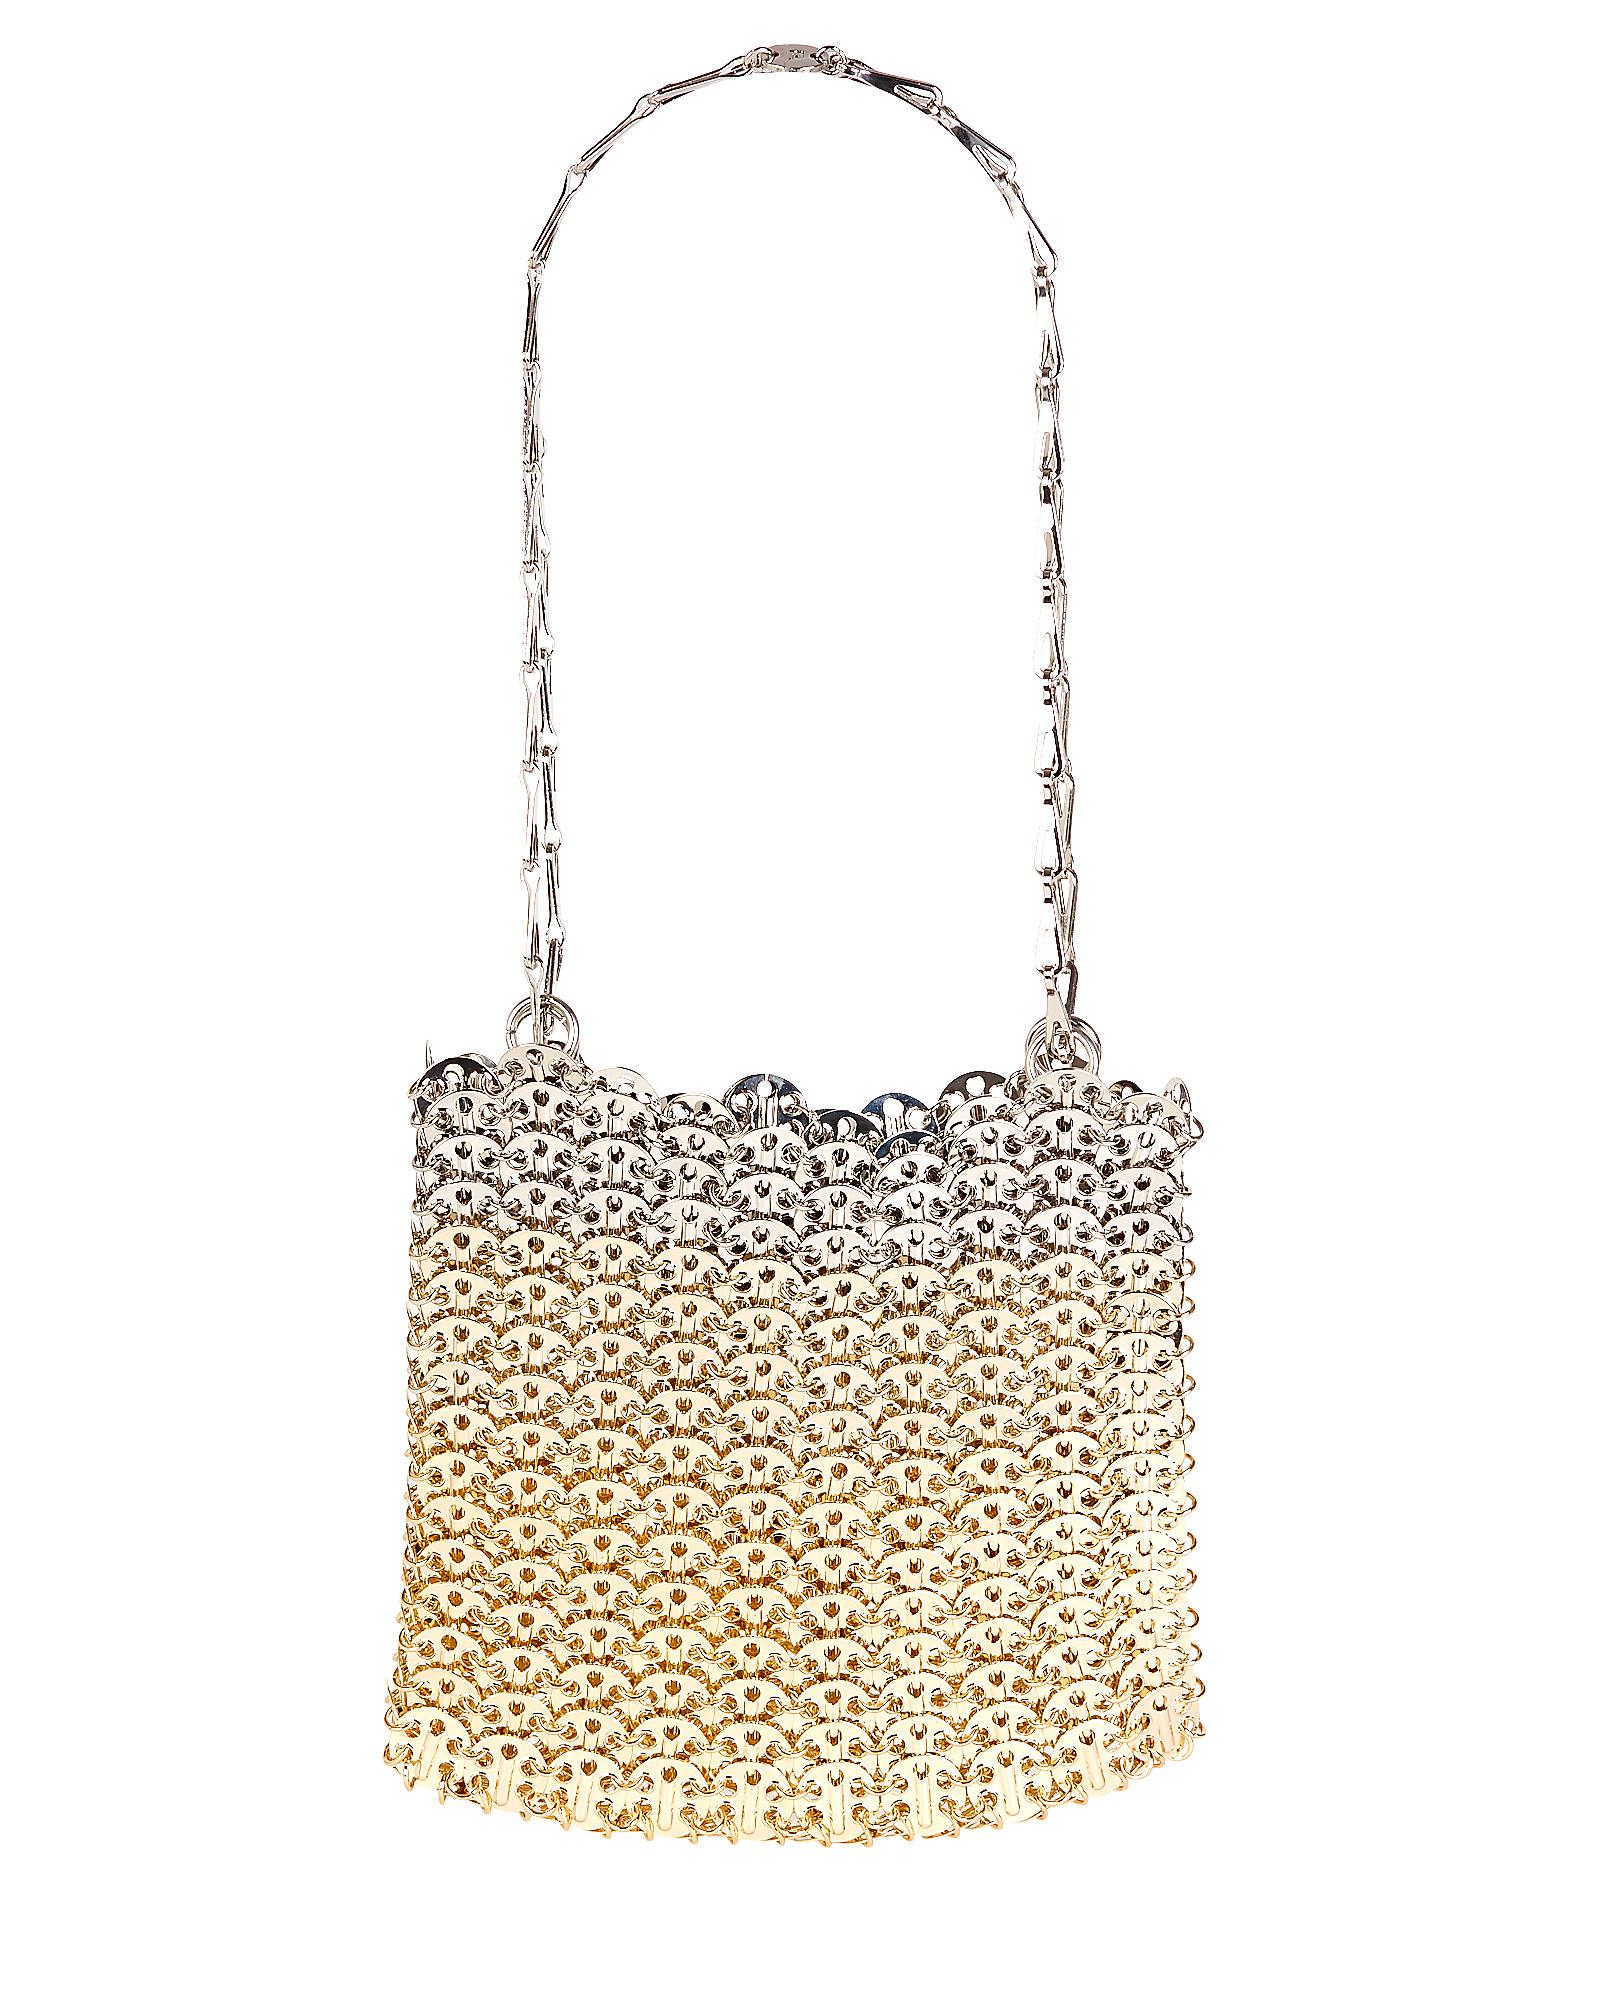 Paco Rabanne 1969 Ombré Chainmail Bag in Gold/Silver (Metallic) - Lyst